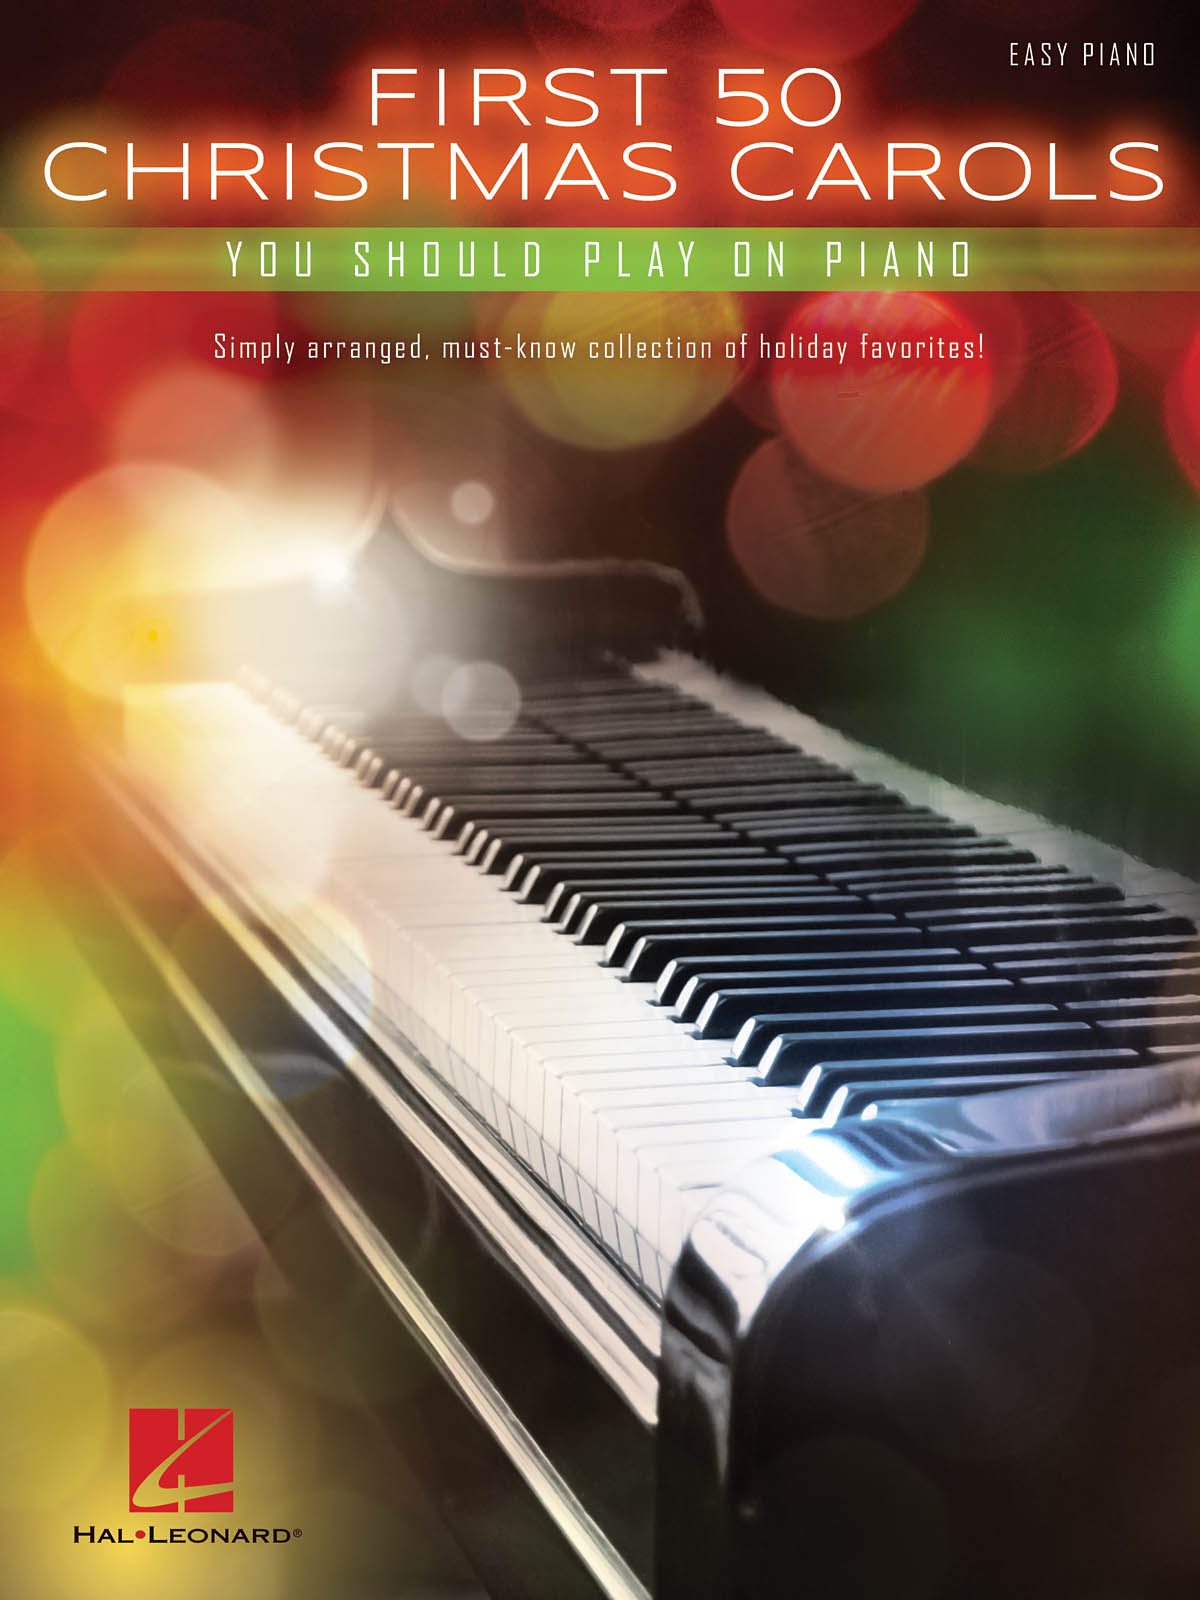 First 50 Christmas Carols You Should Play on Piano